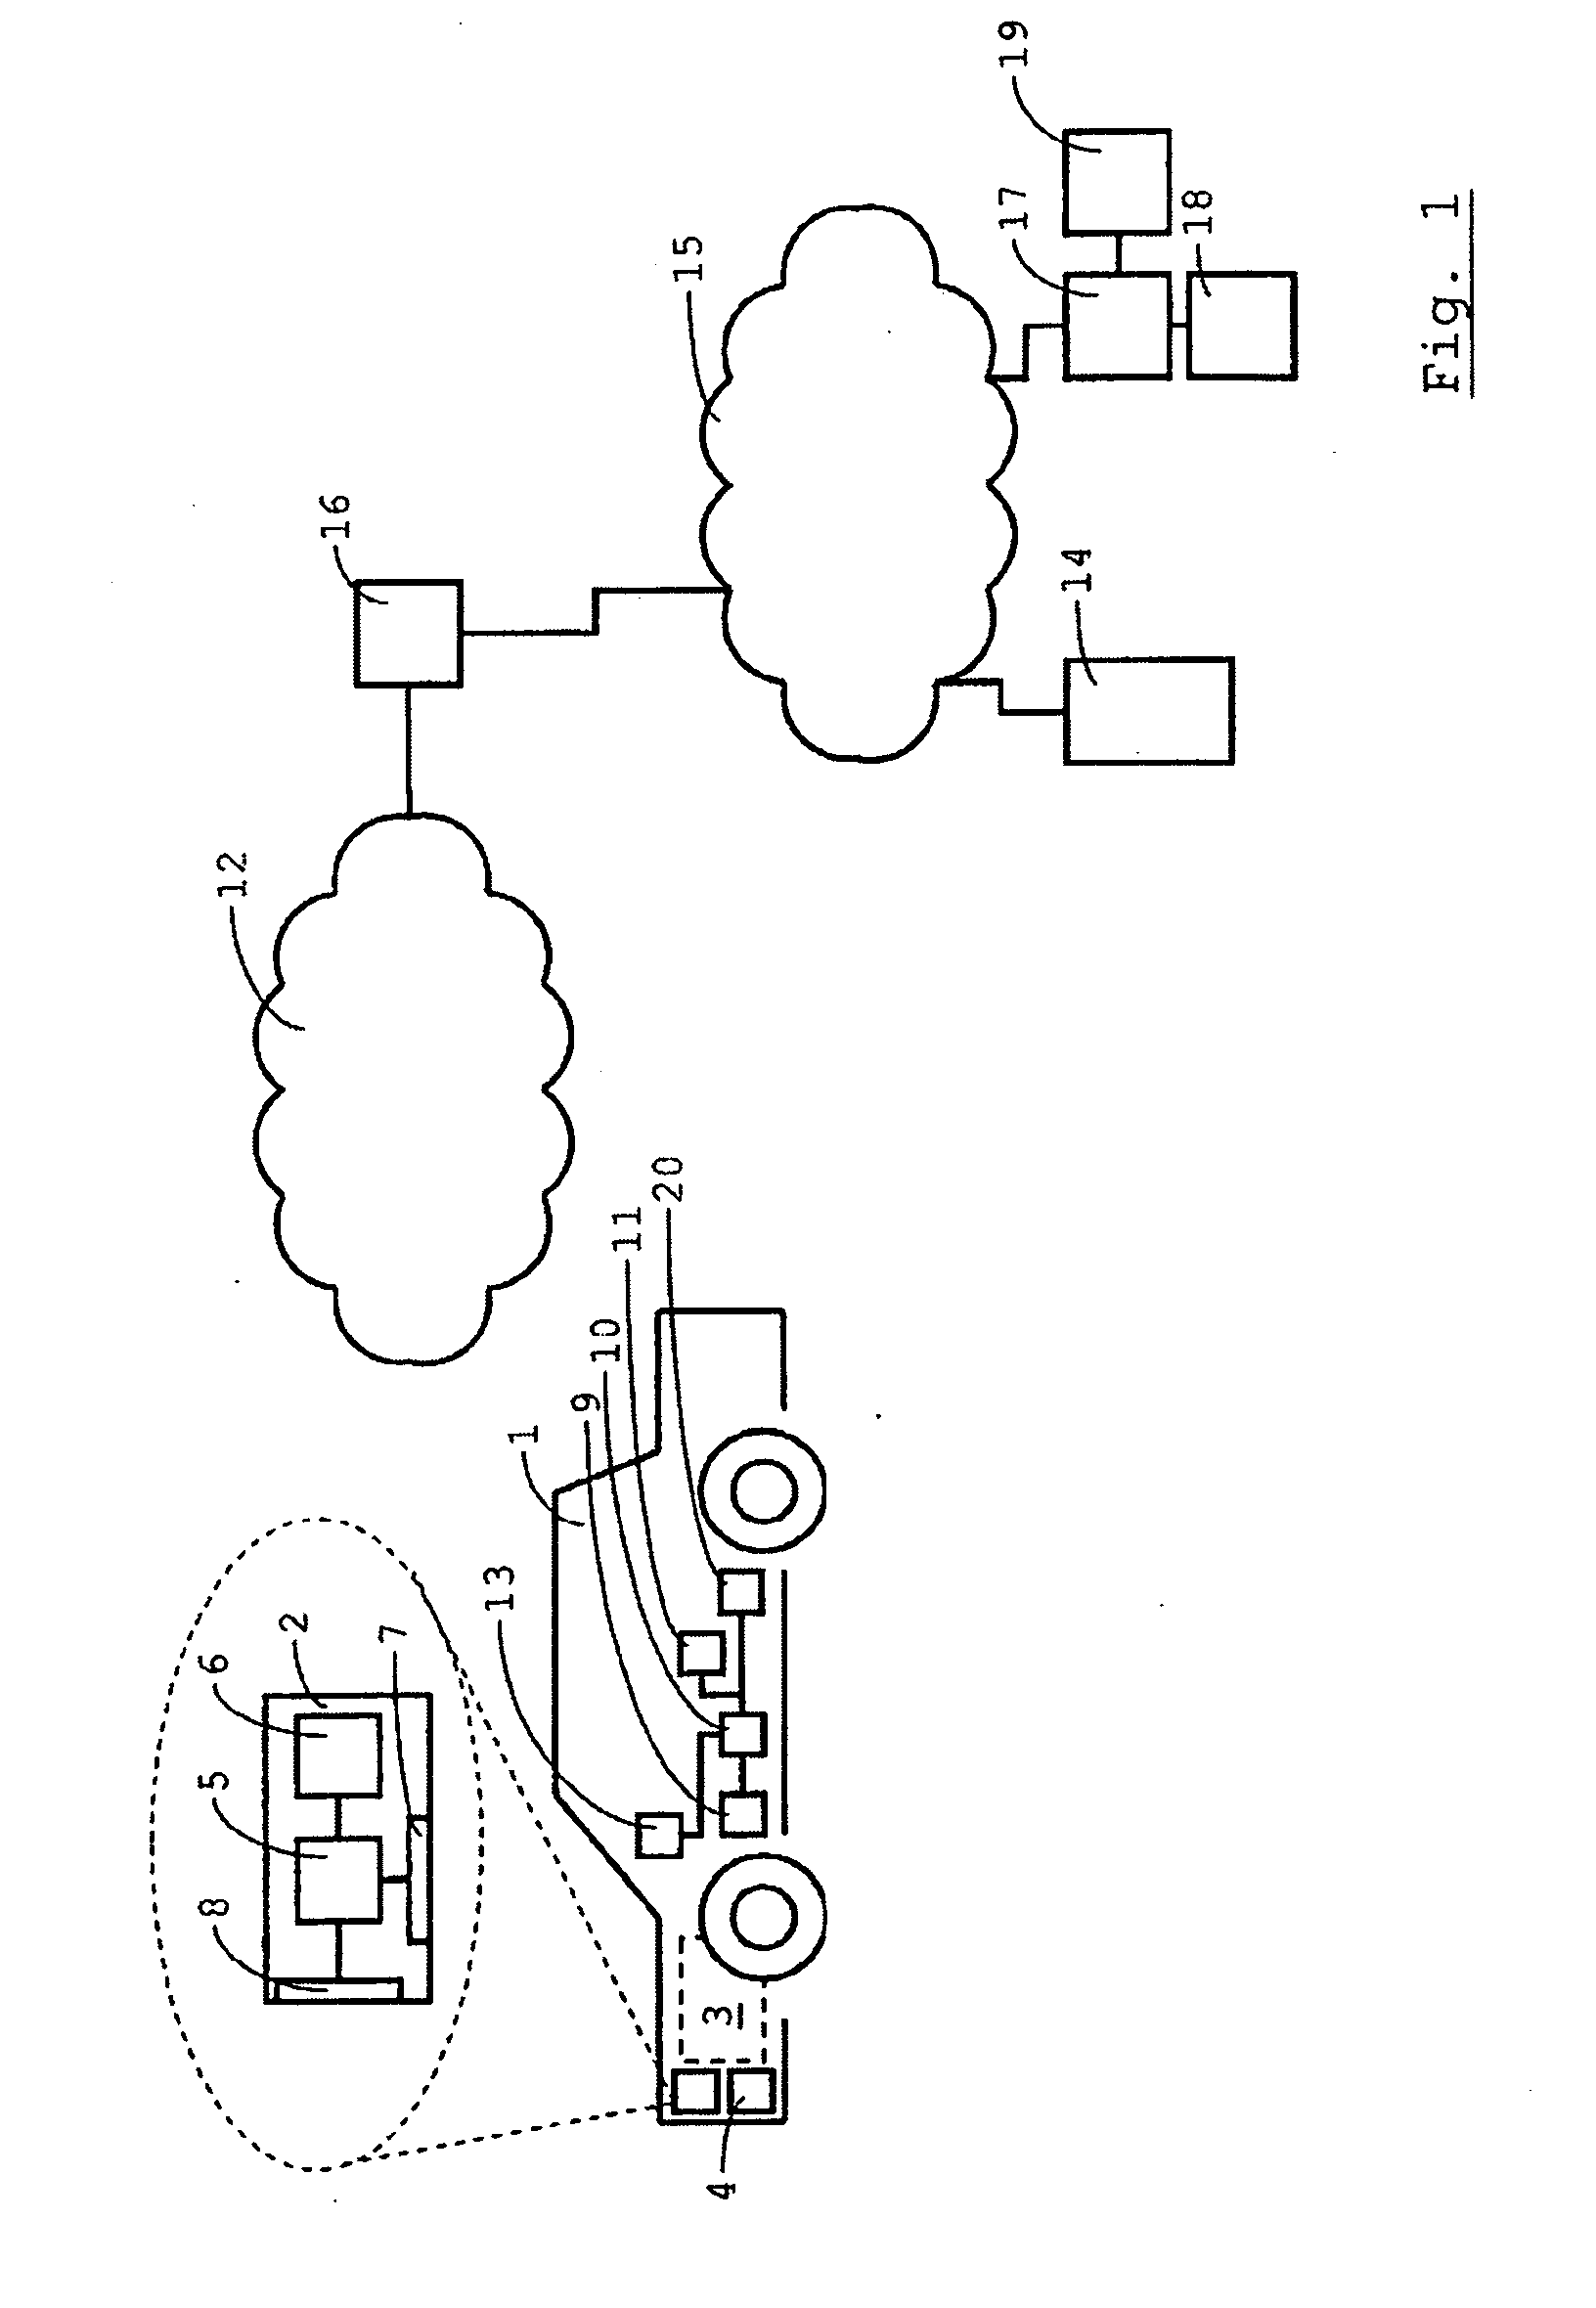 Configuration of an Electronic Control System for Controlling the Operation of at Least One Component of a Vehicle